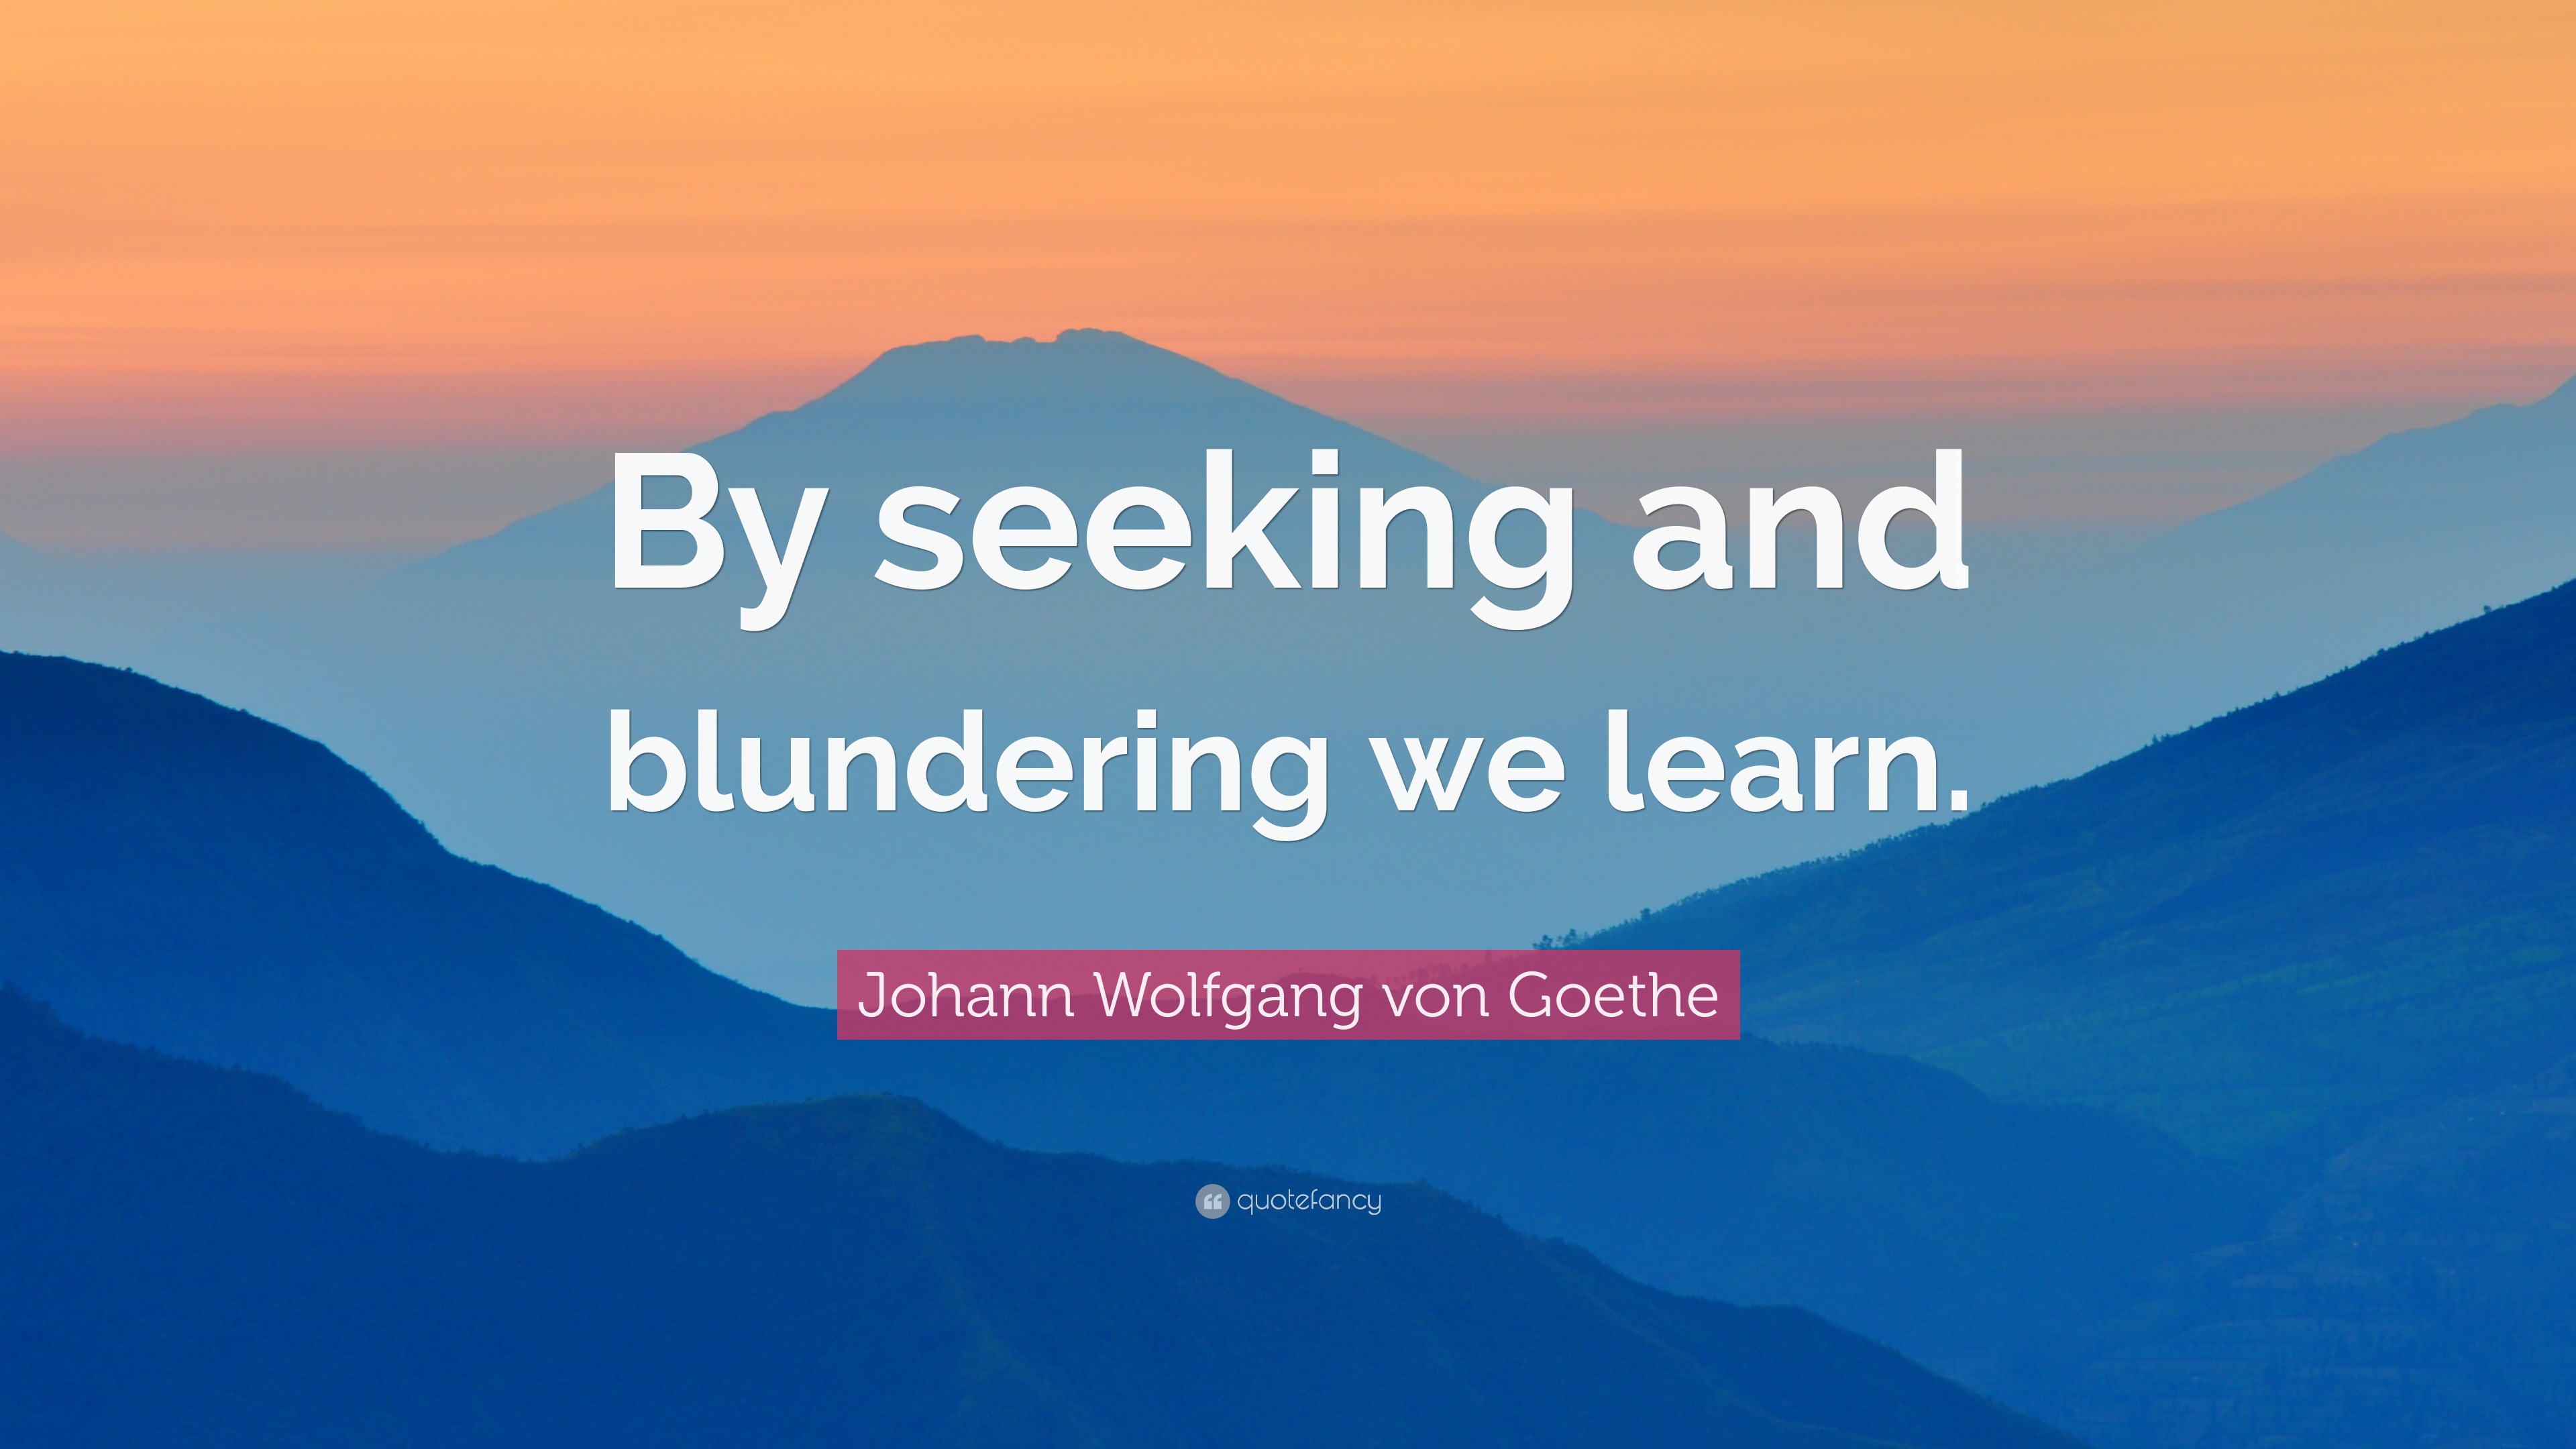 By seeking and blundering we learn. - Quote